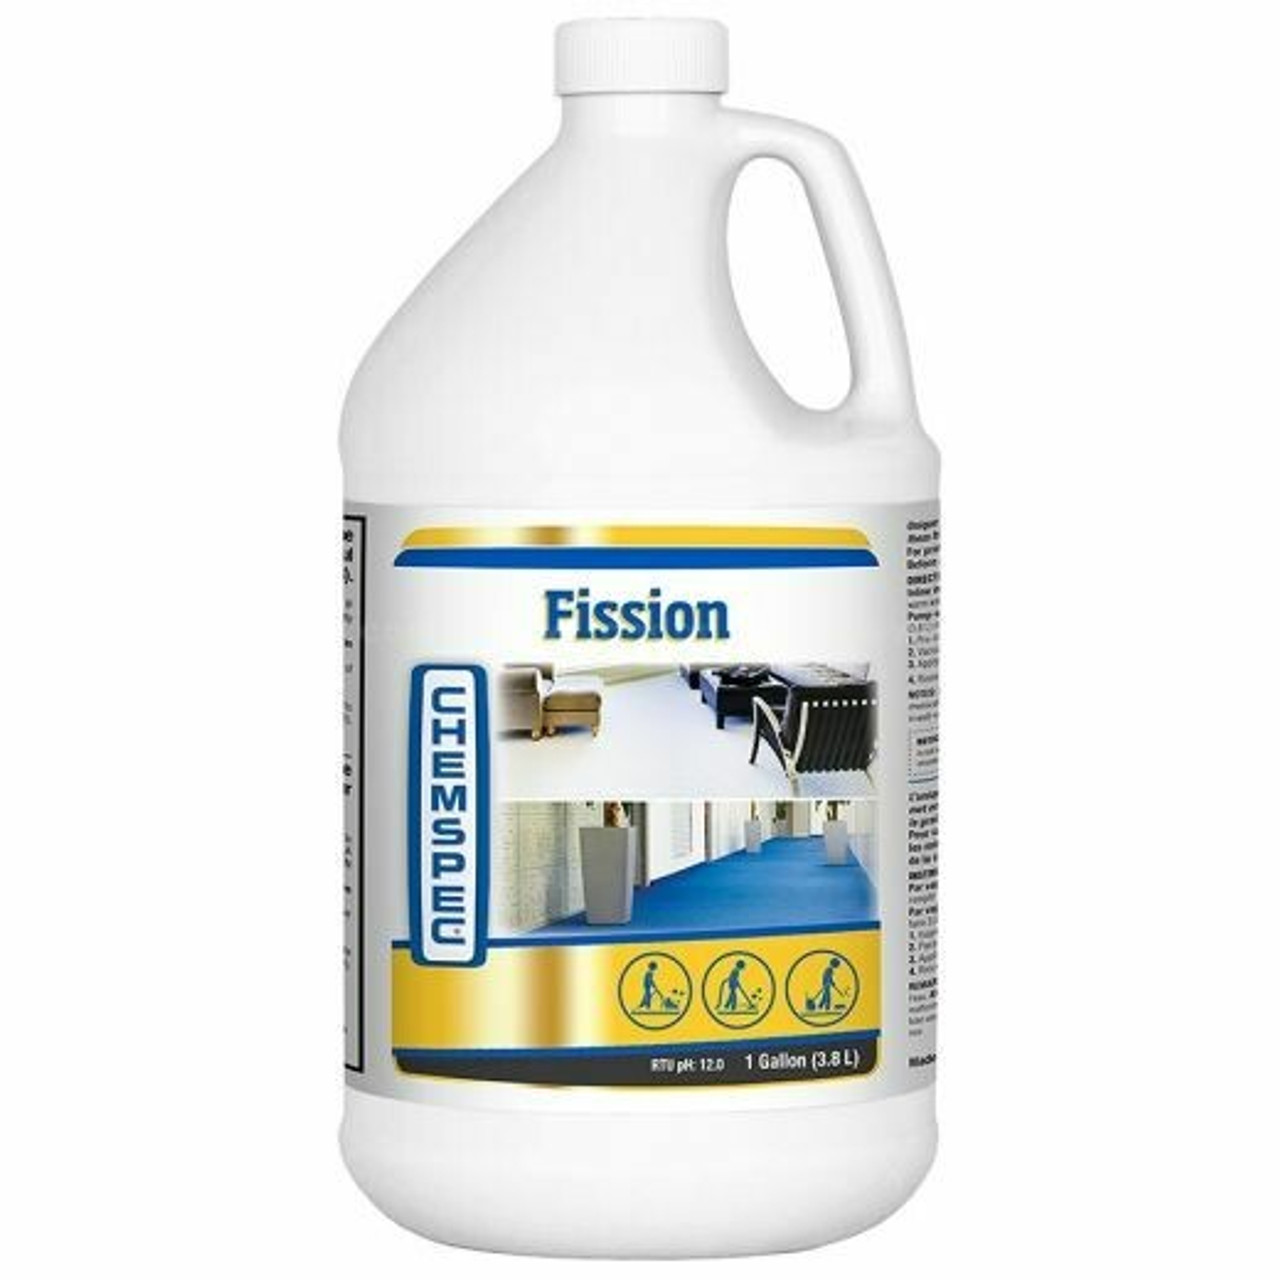 Chemspec Fission - 1gal - CASE of 4ea